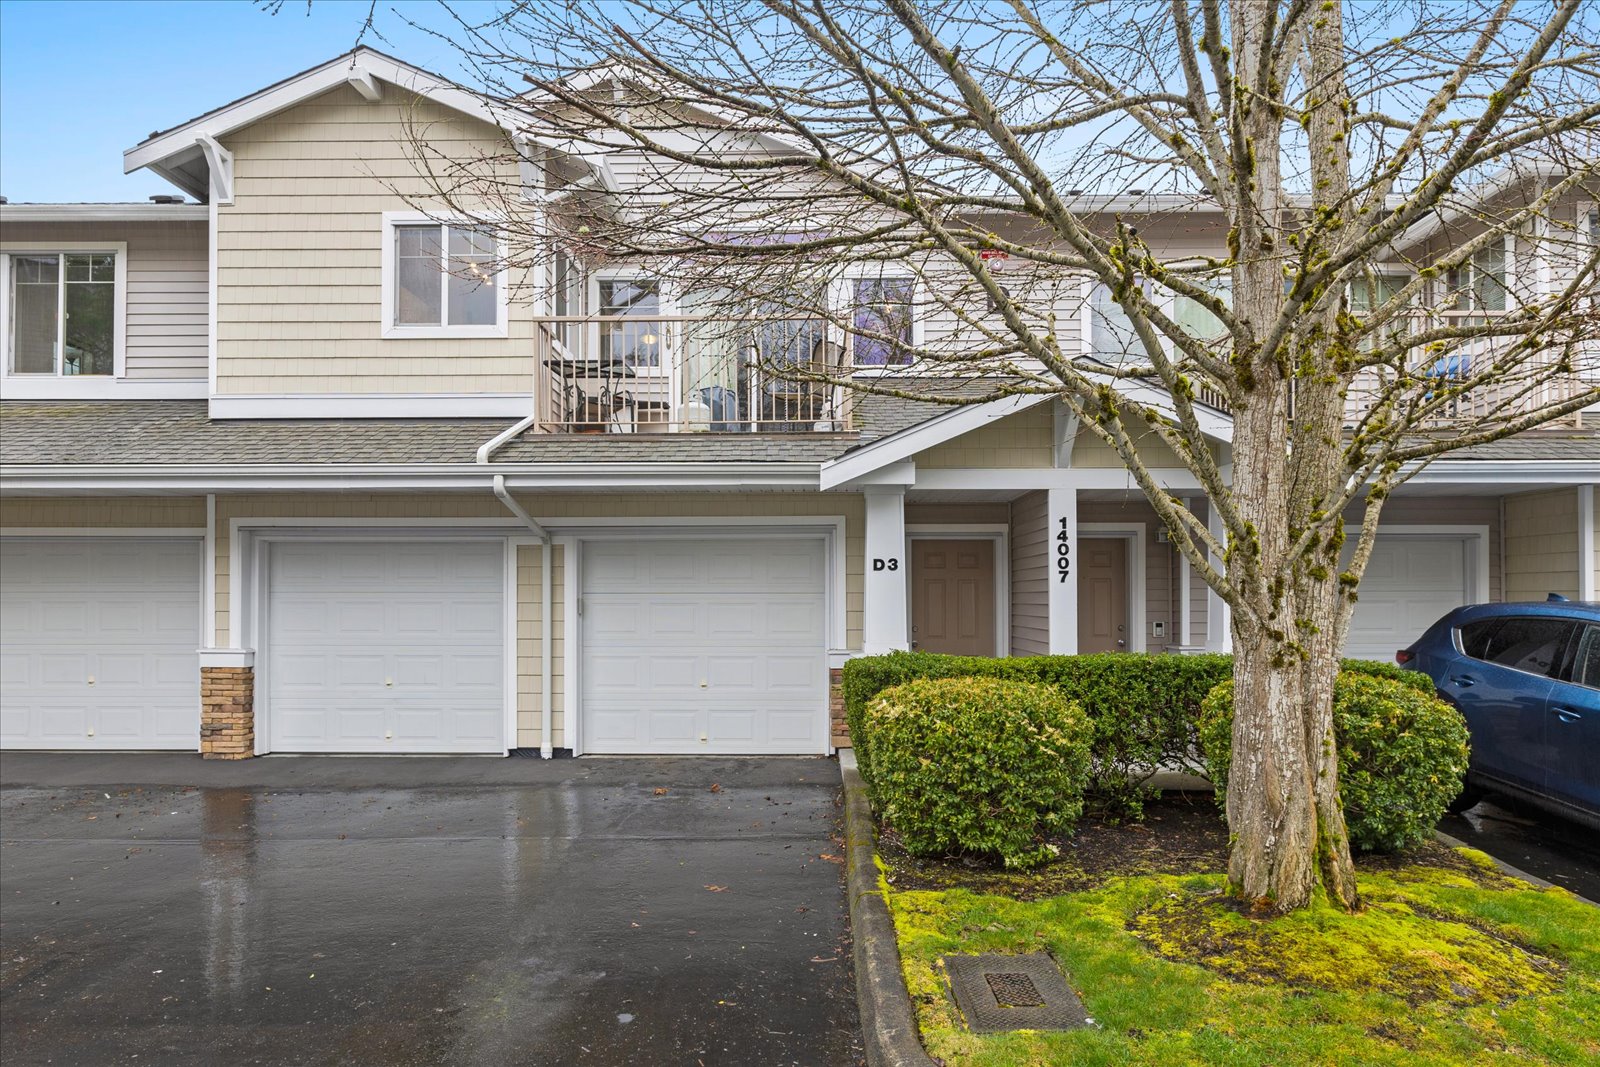 Front view of front of 14007 69th Dr SE #D3, Snohomish, WA 98296